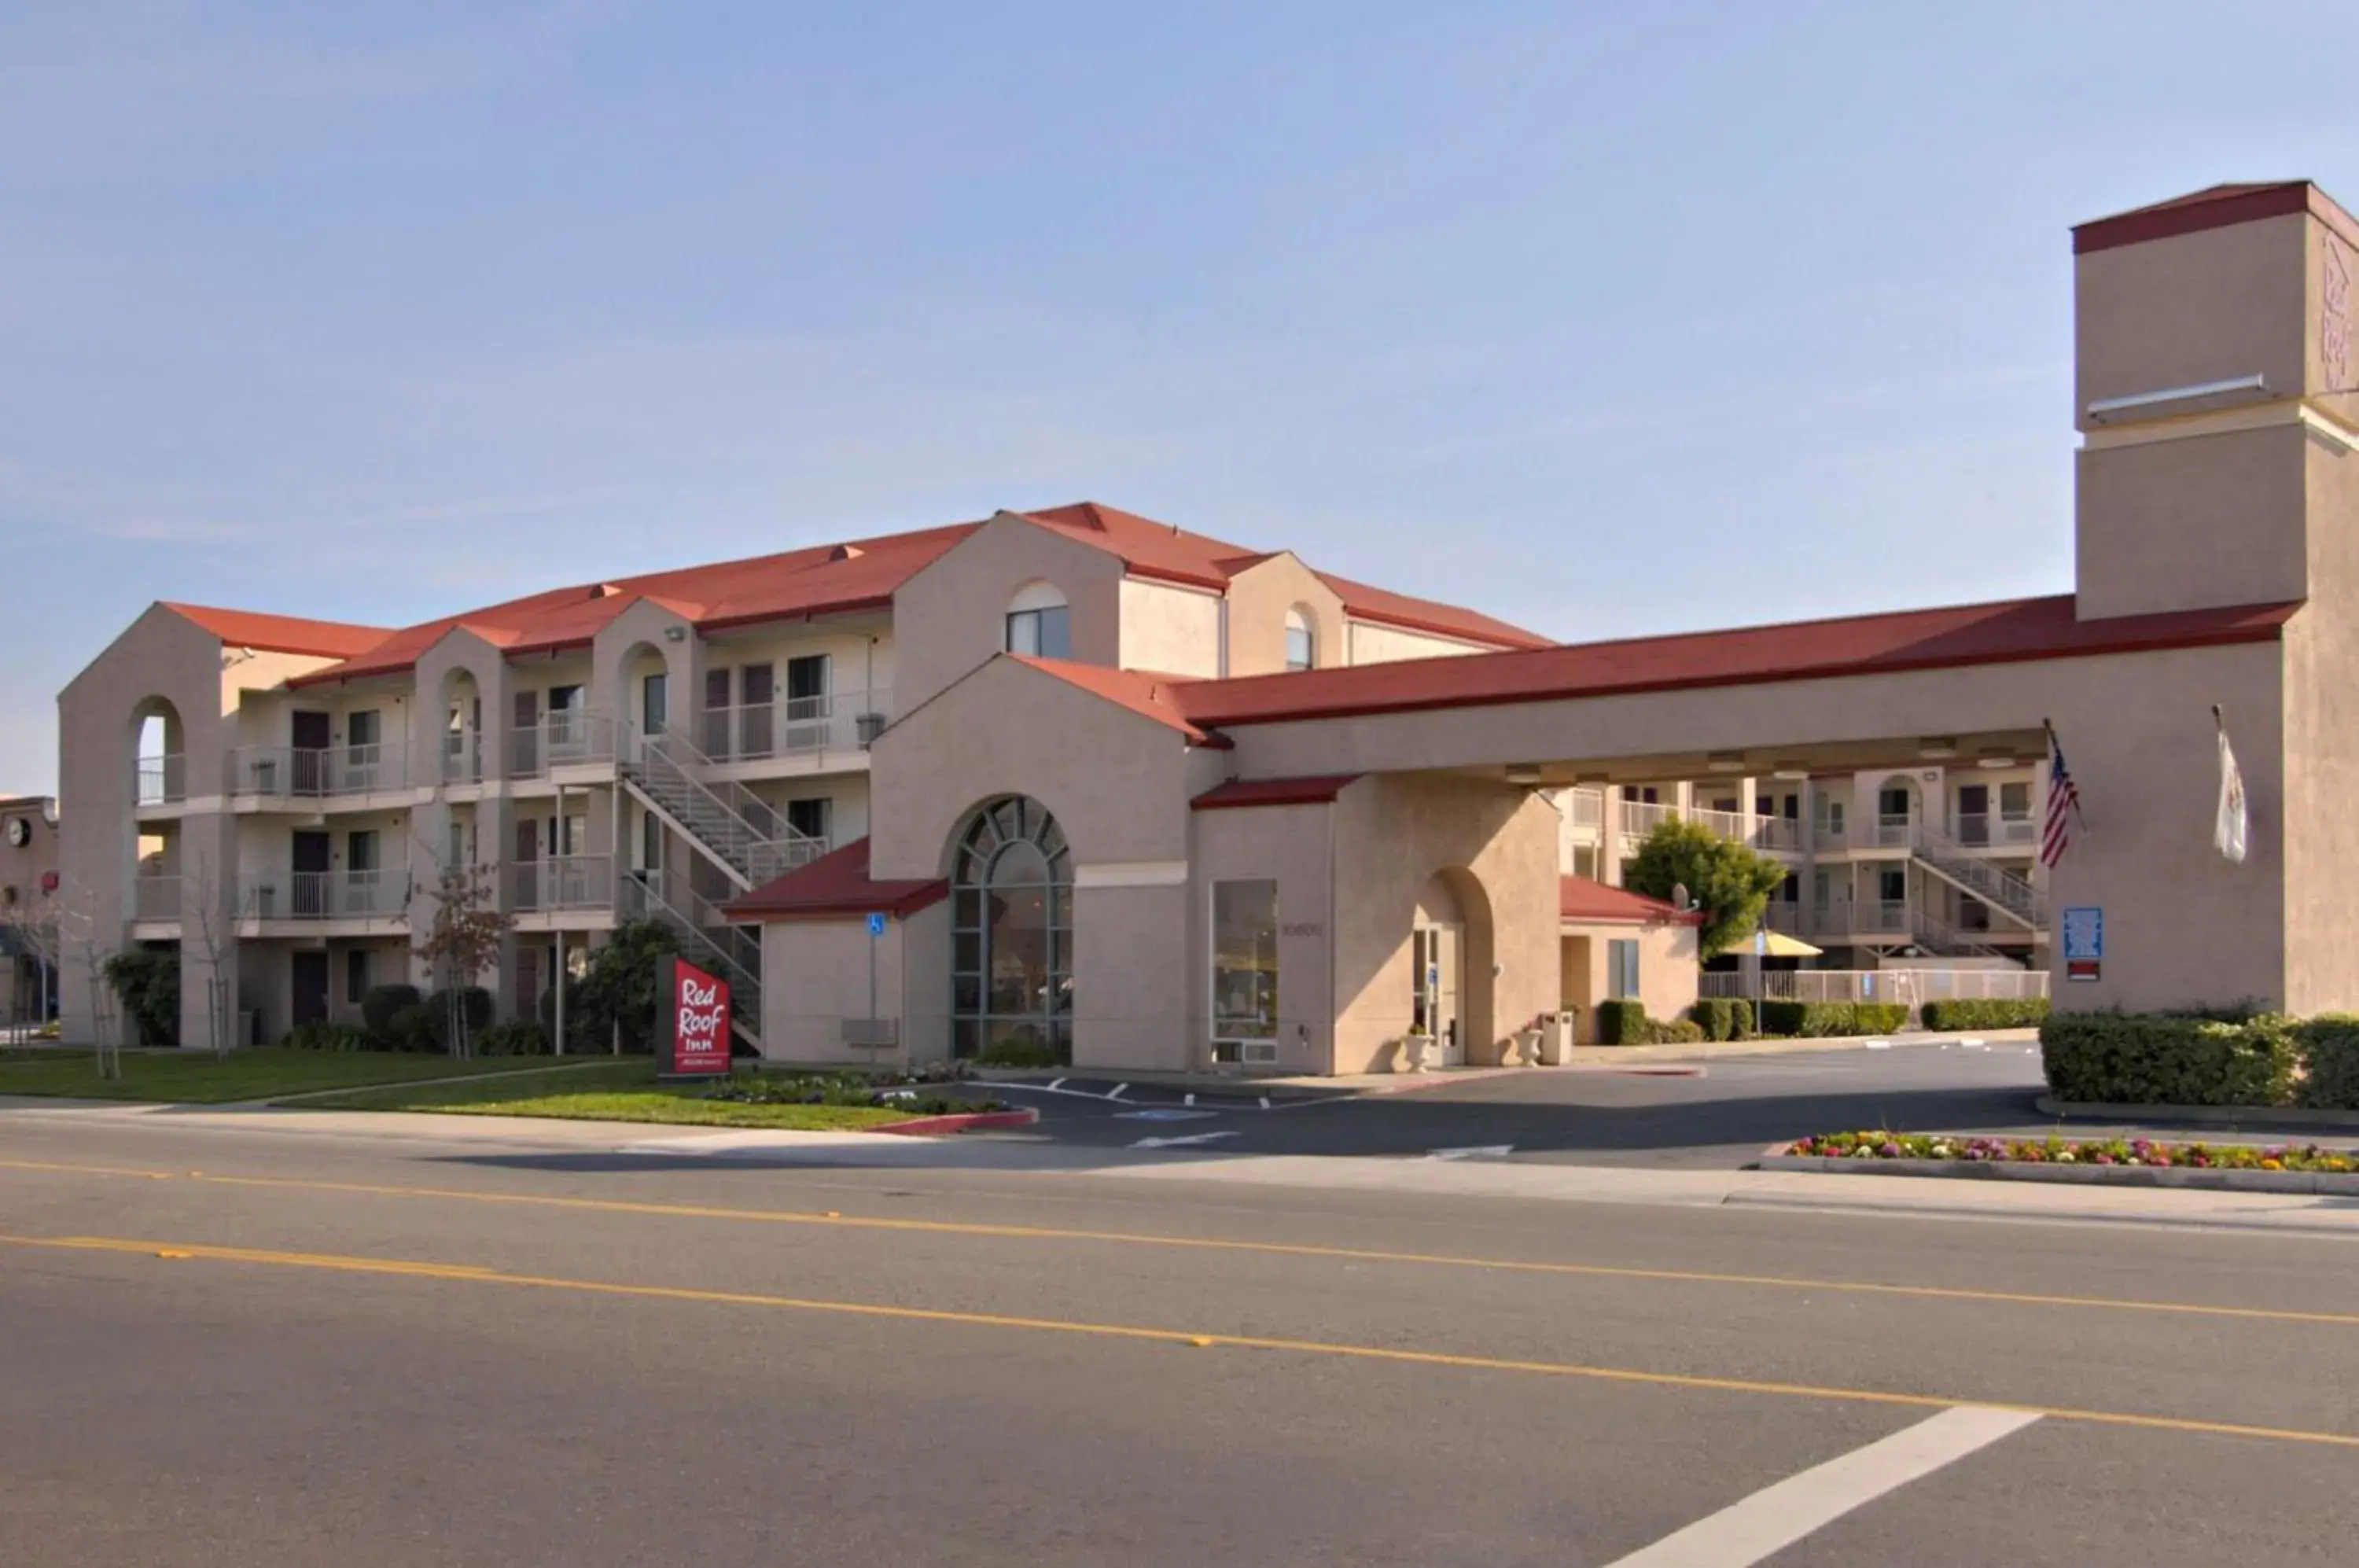 Property Building in California Inn and Suites, Rancho Cordova